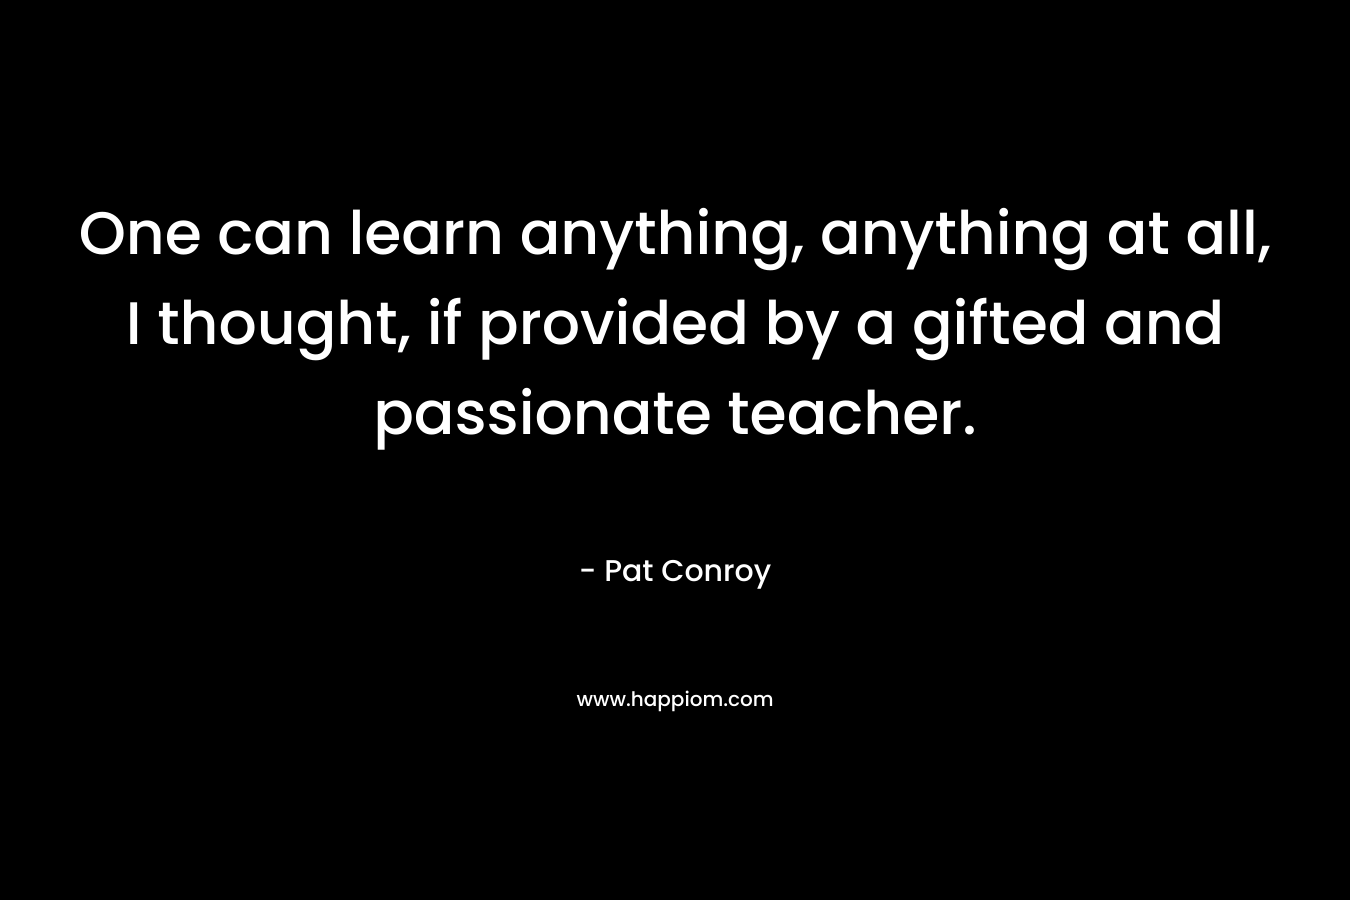 One can learn anything, anything at all, I thought, if provided by a gifted and passionate teacher. – Pat Conroy